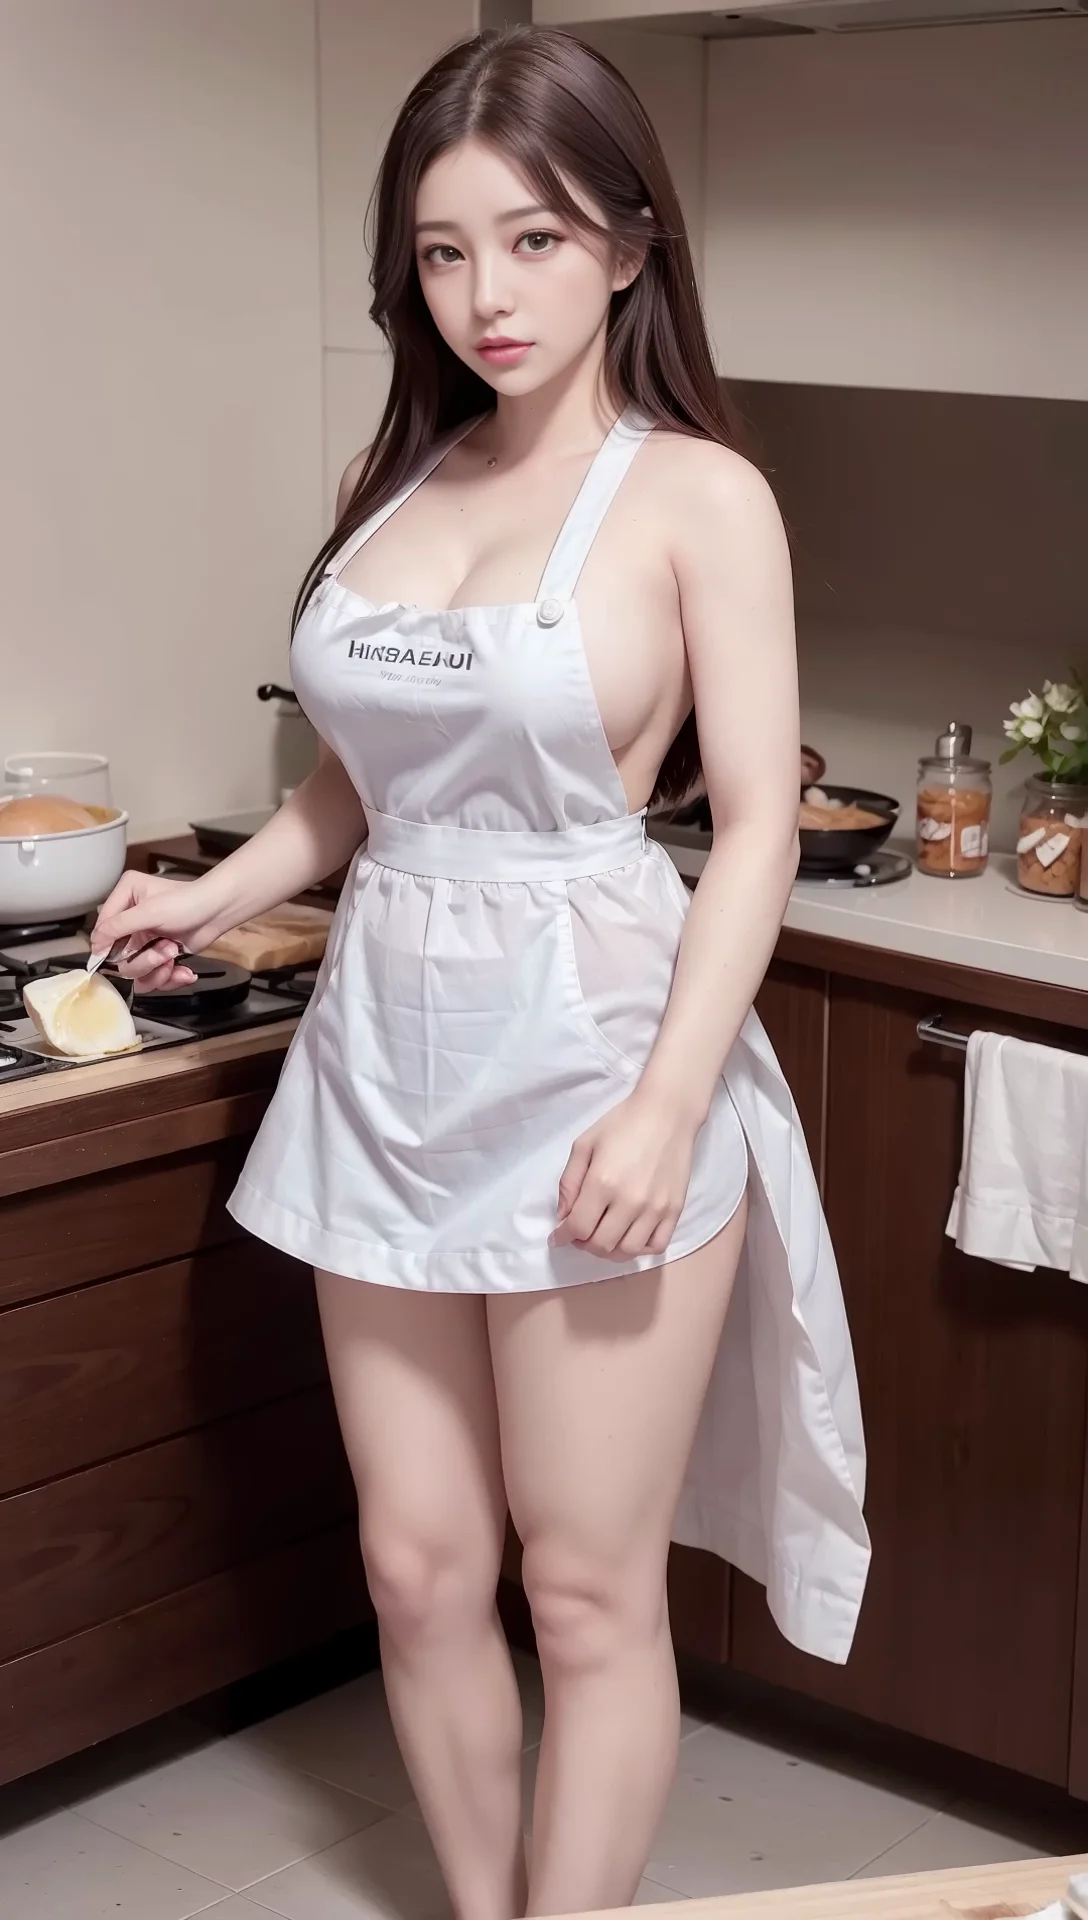 Attractive Woman Sexy Apron Images 08